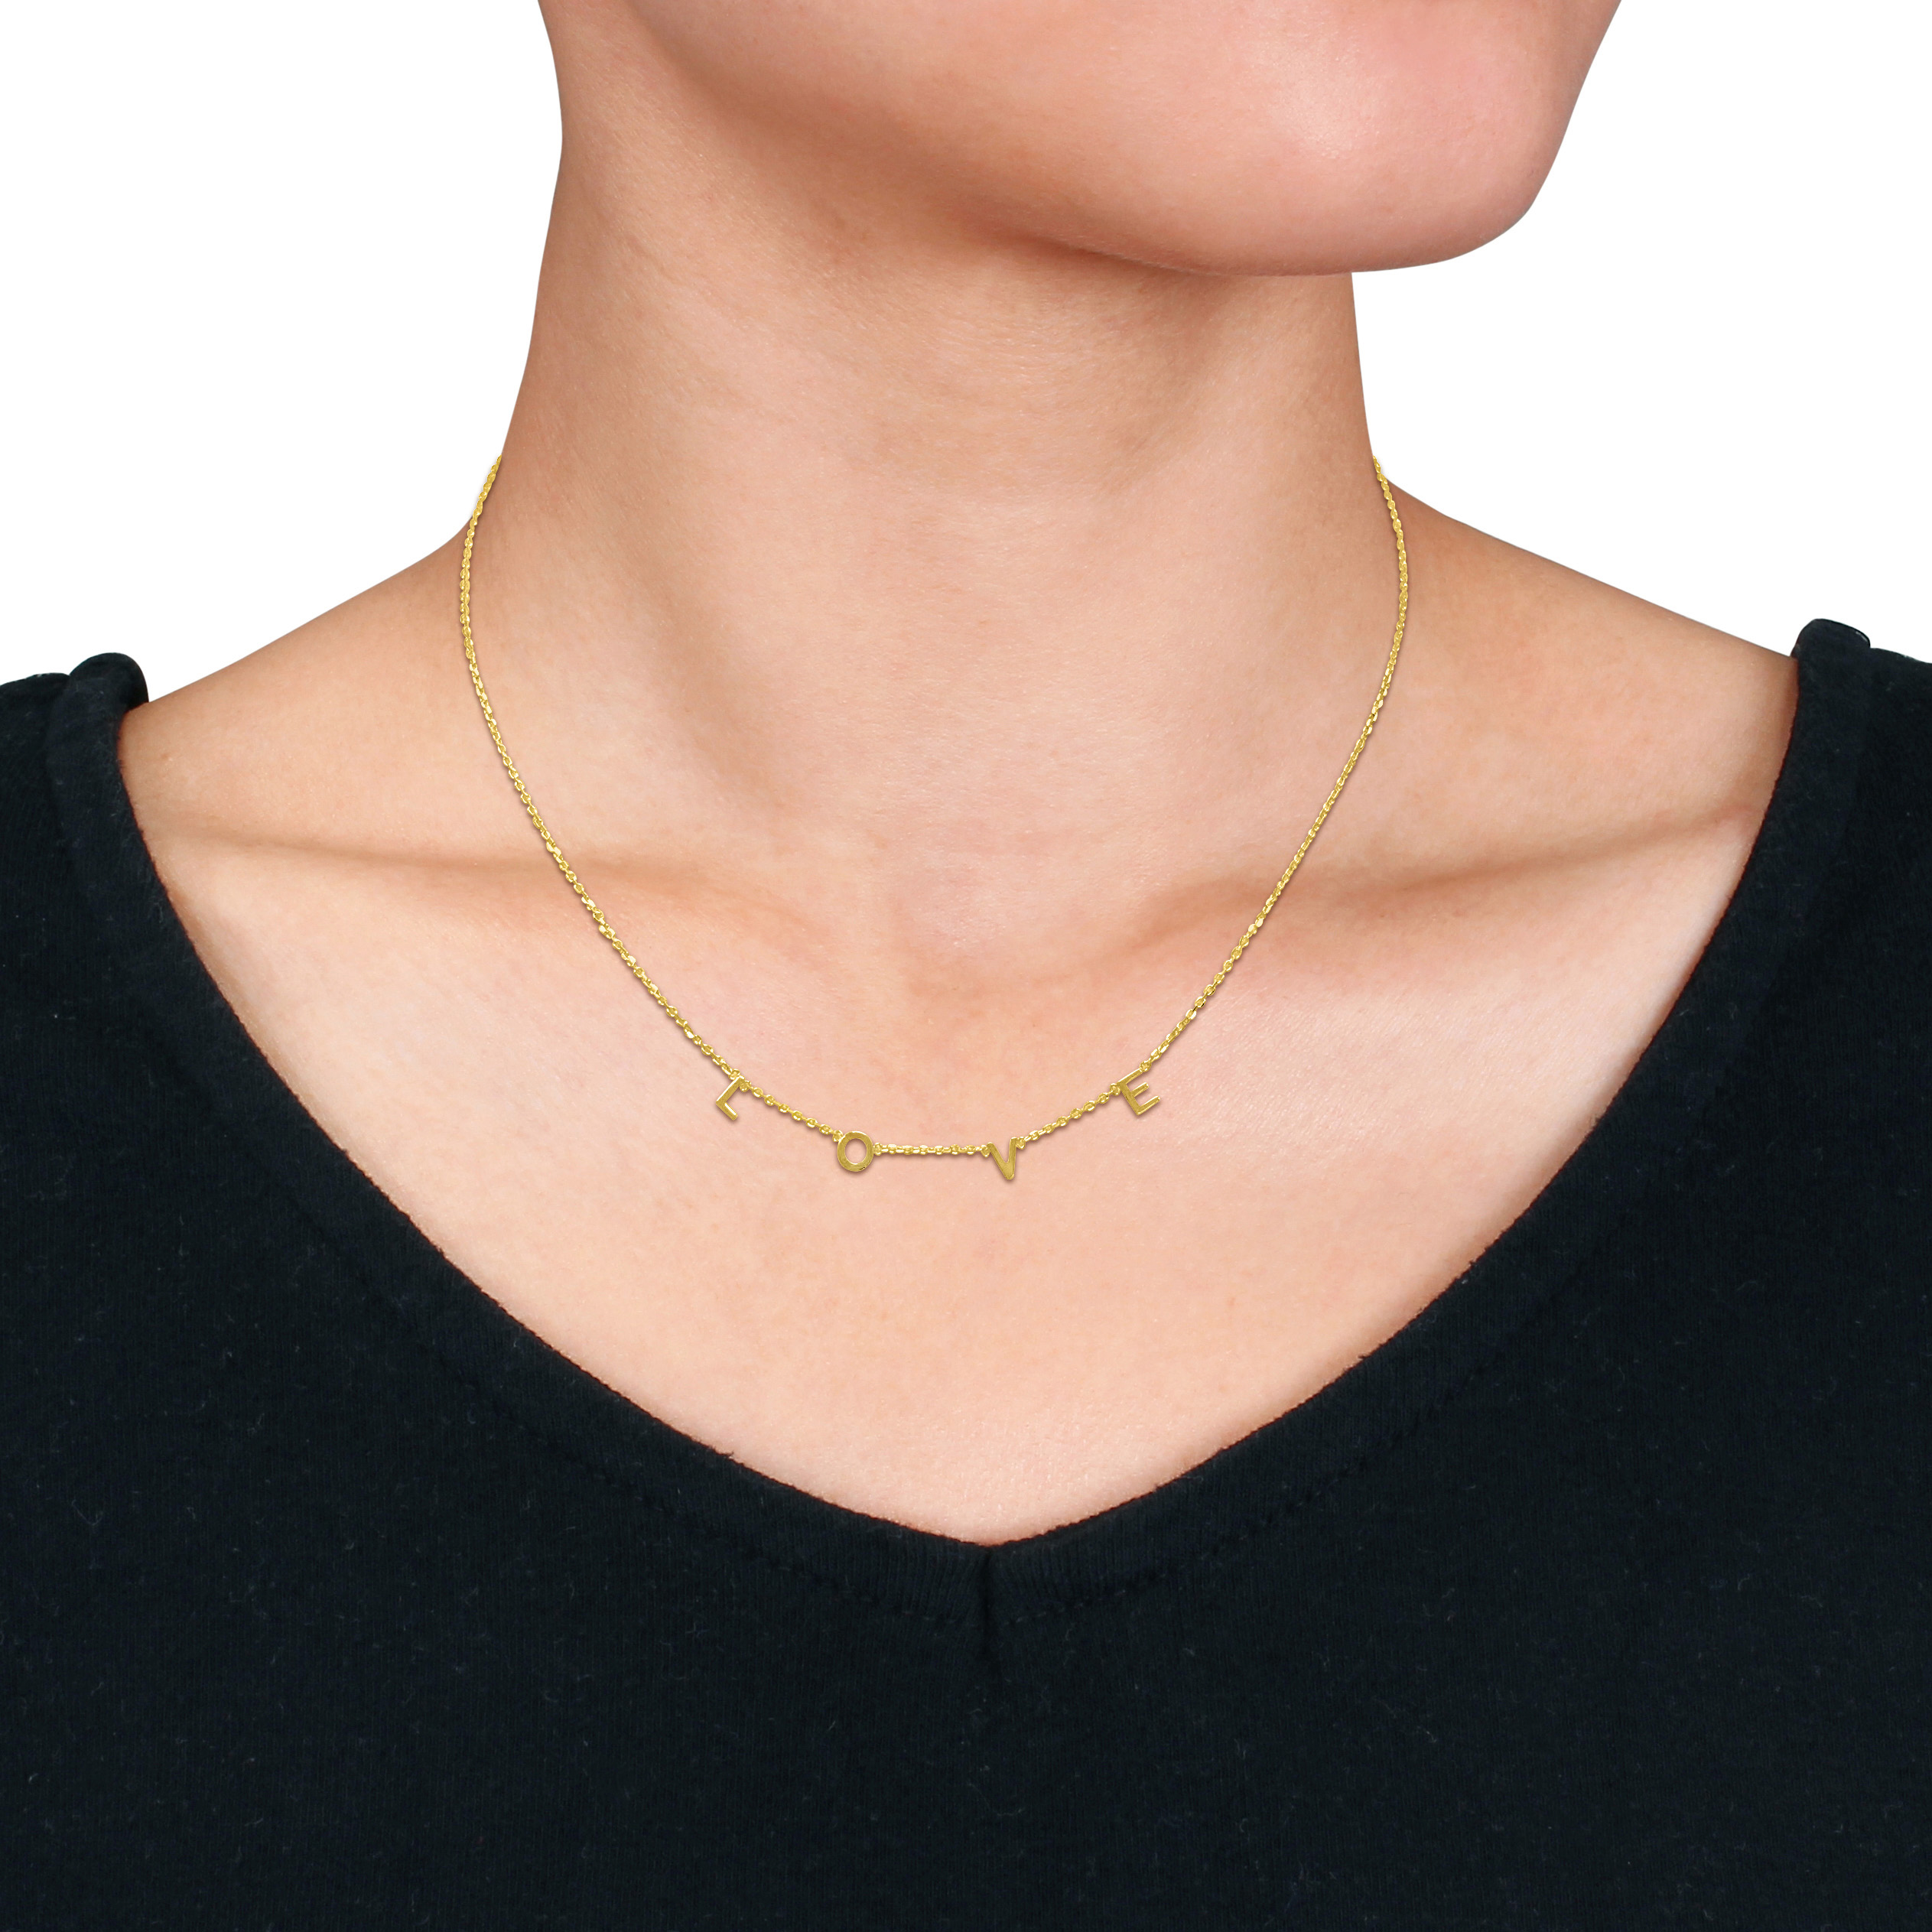 LOVE Necklace with Chain in 14k Yellow Gold - 16.5+1 in.